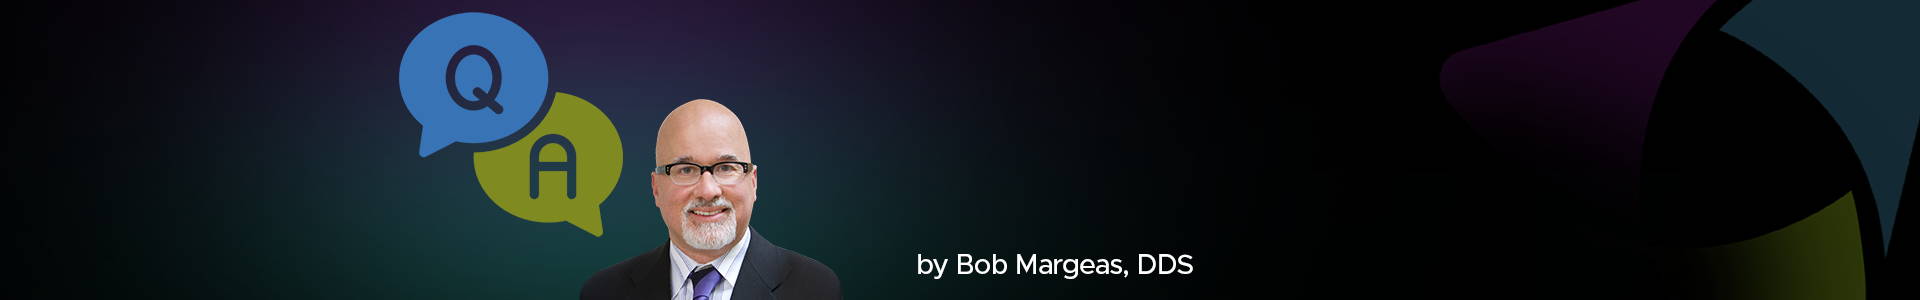 blog banner featuring Dr Bob Margeas and icon of Q&A